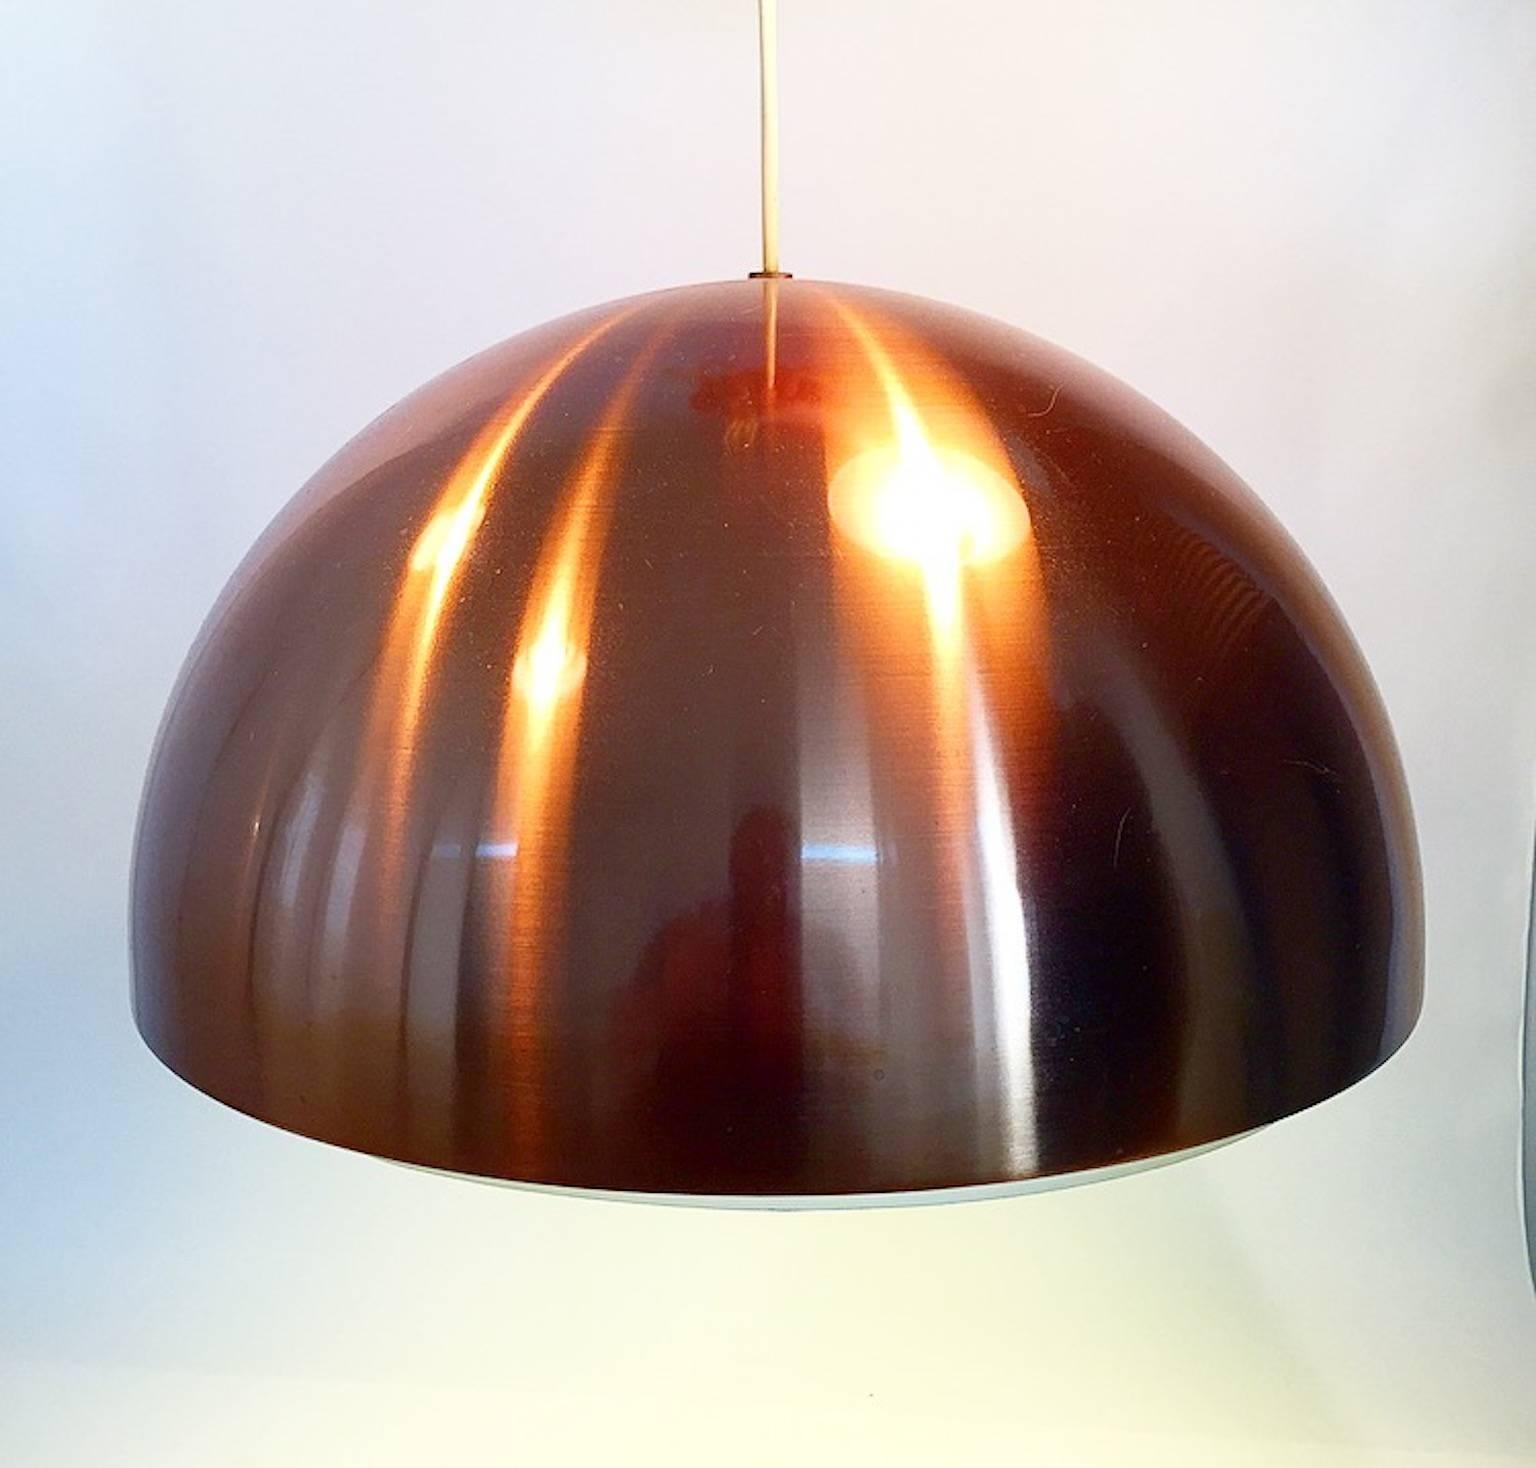 A beautiful pendant designed in 1967 by Vilhelm Wohlert and Jørgen Bo for the manufacturer Louis Poulsen. 

This lamp was originally designed for the Danish museum Louisiana. 

This Lamp is in matte copper with a white metal grid. The lamp gives